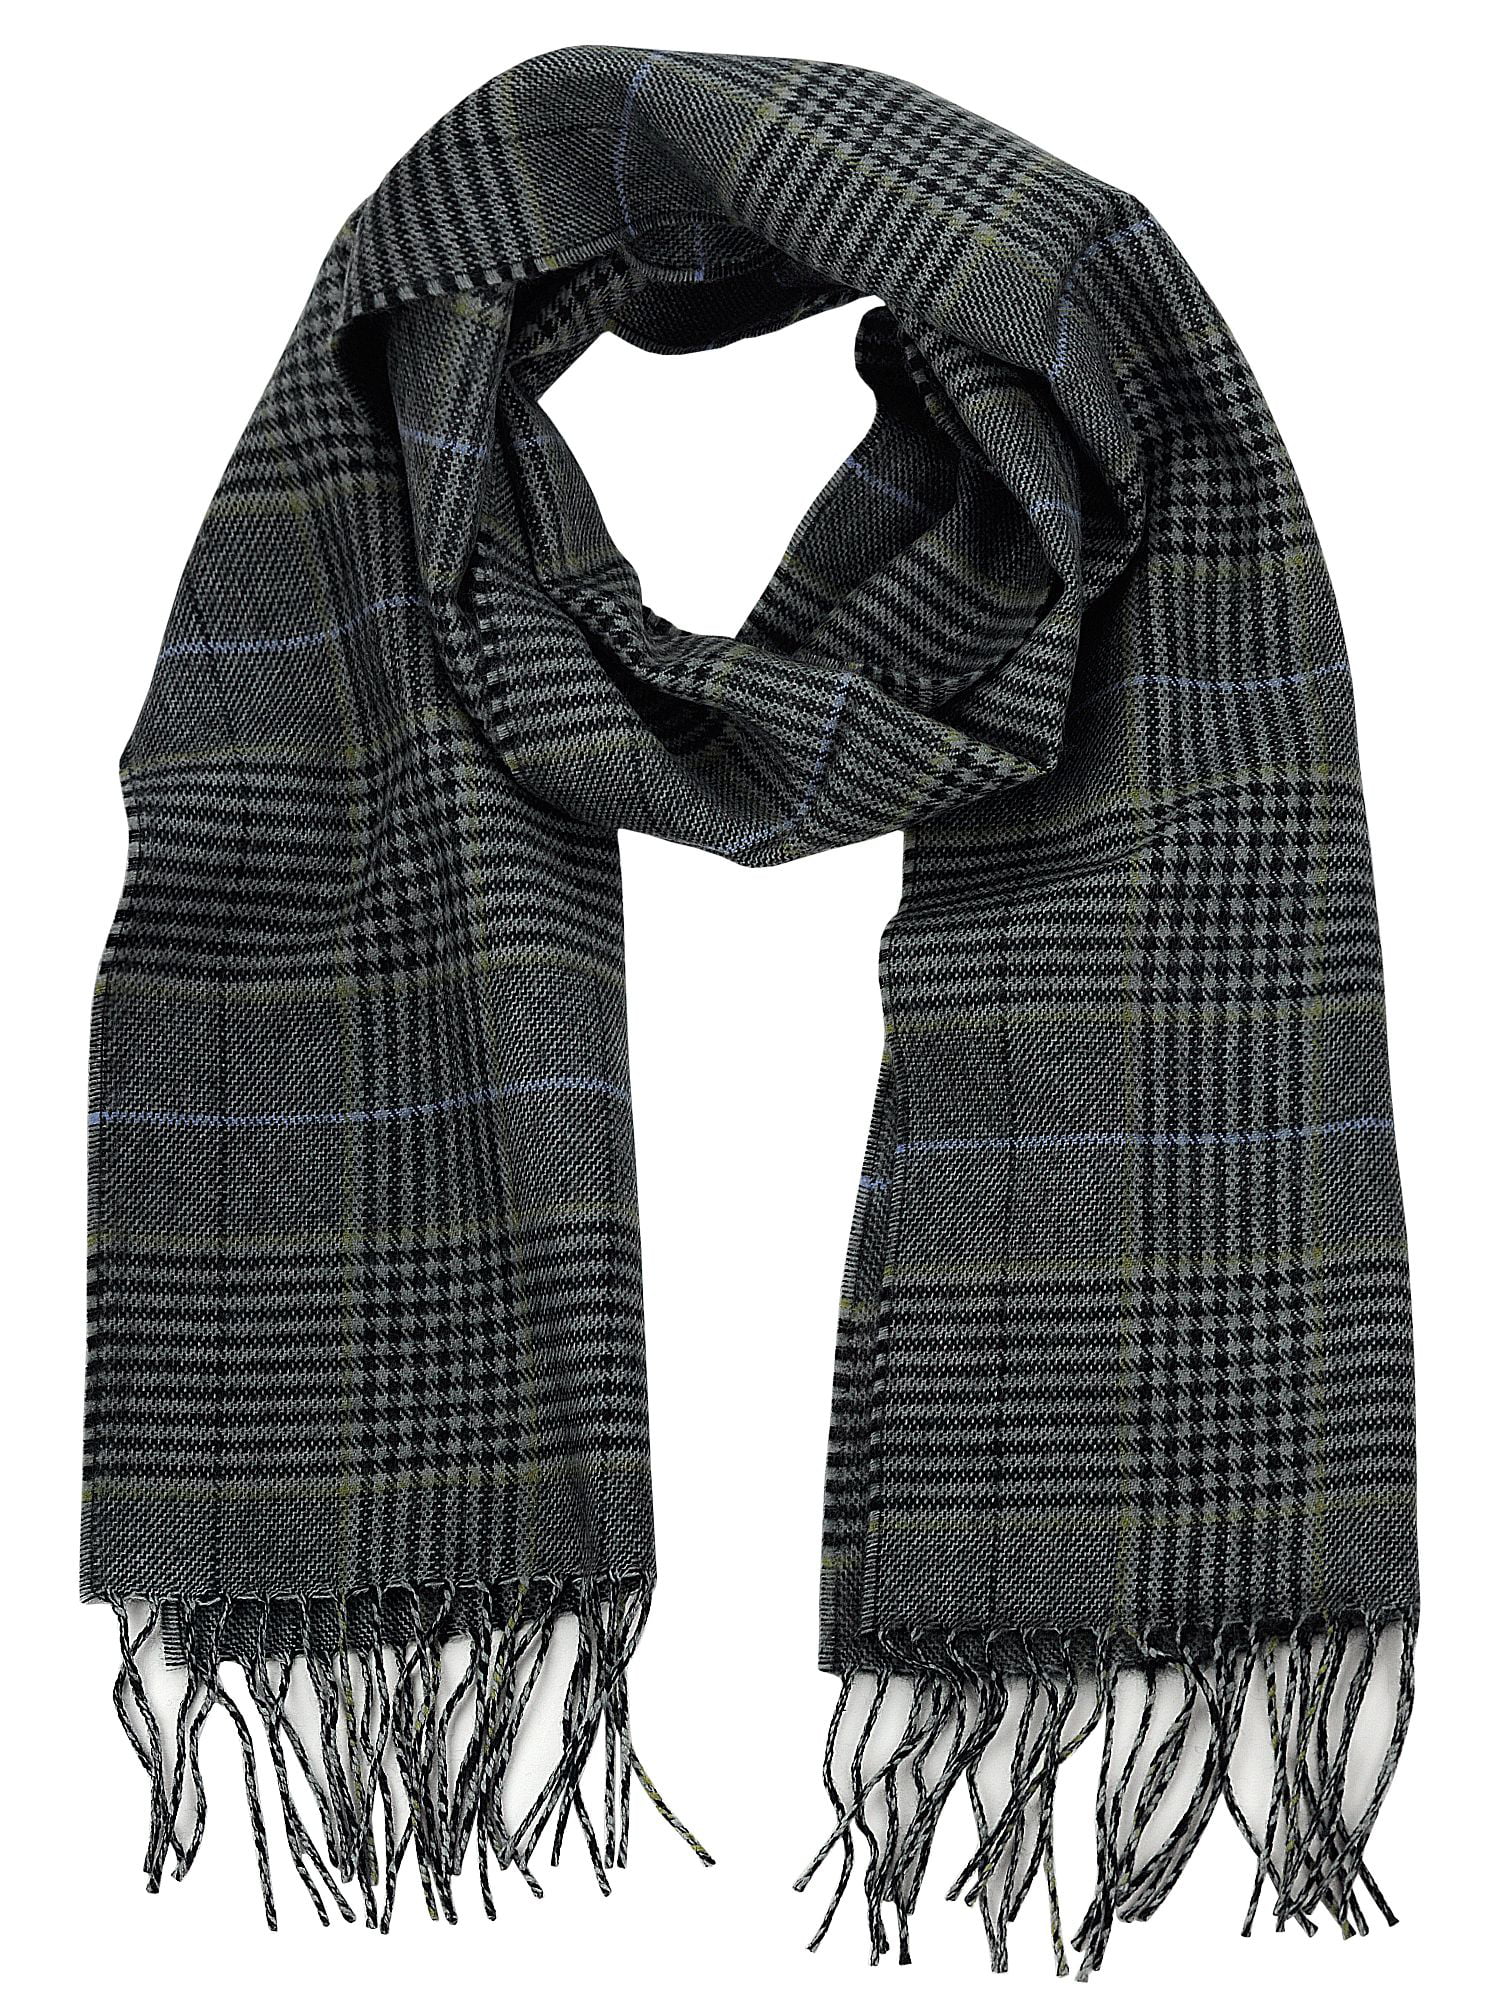 D&Y Unisex Classic Softer Than Cashmere Plaid Fringe End Scarf, Gray ...